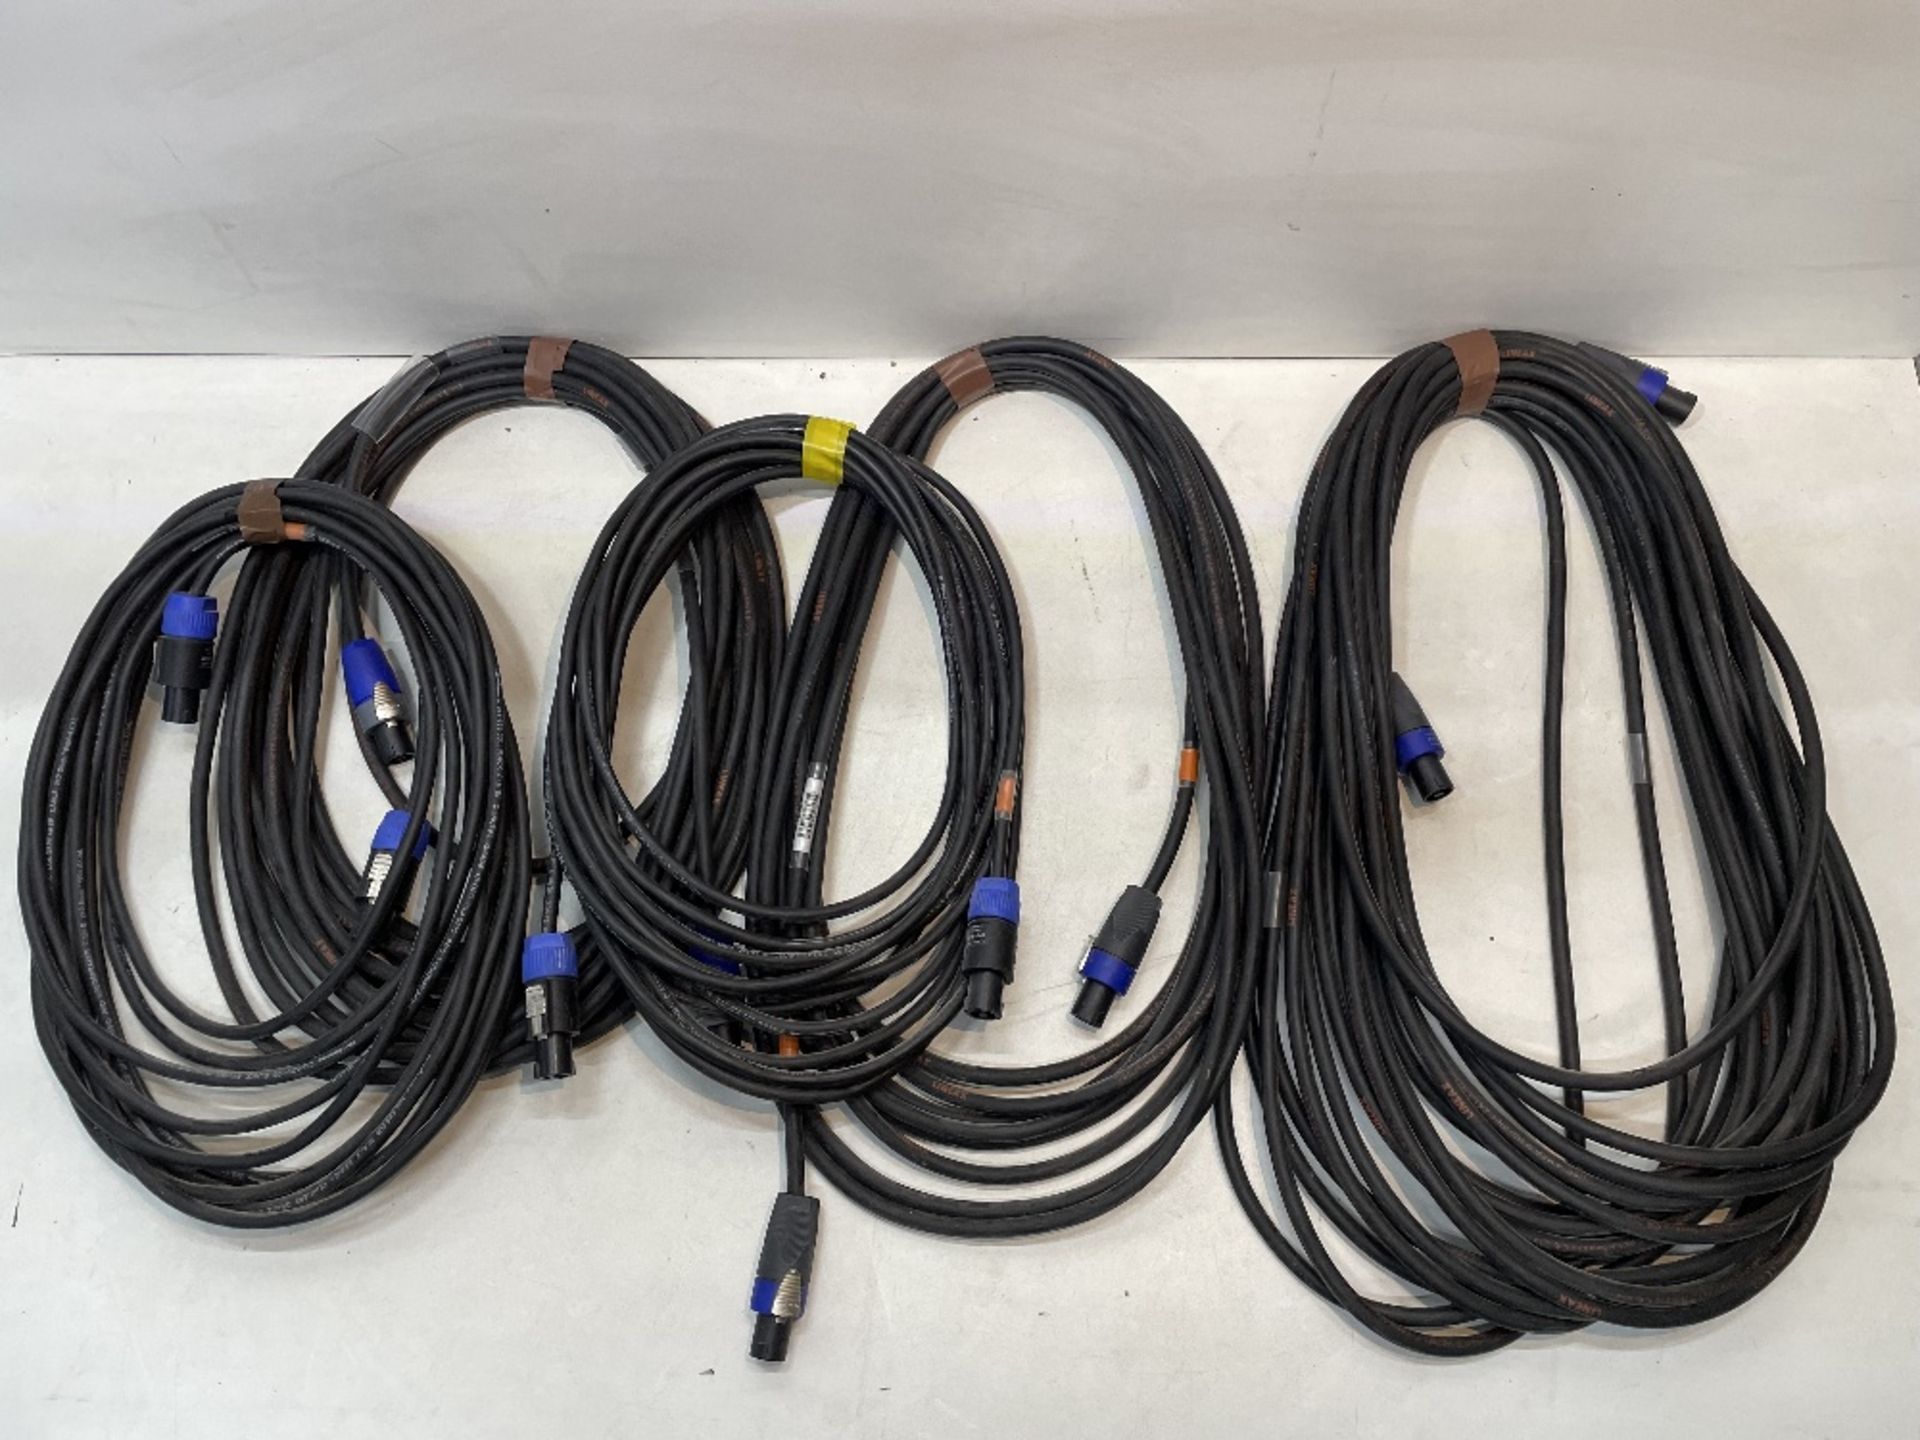 5 x Various Sized 2-Pole Speakon Cables